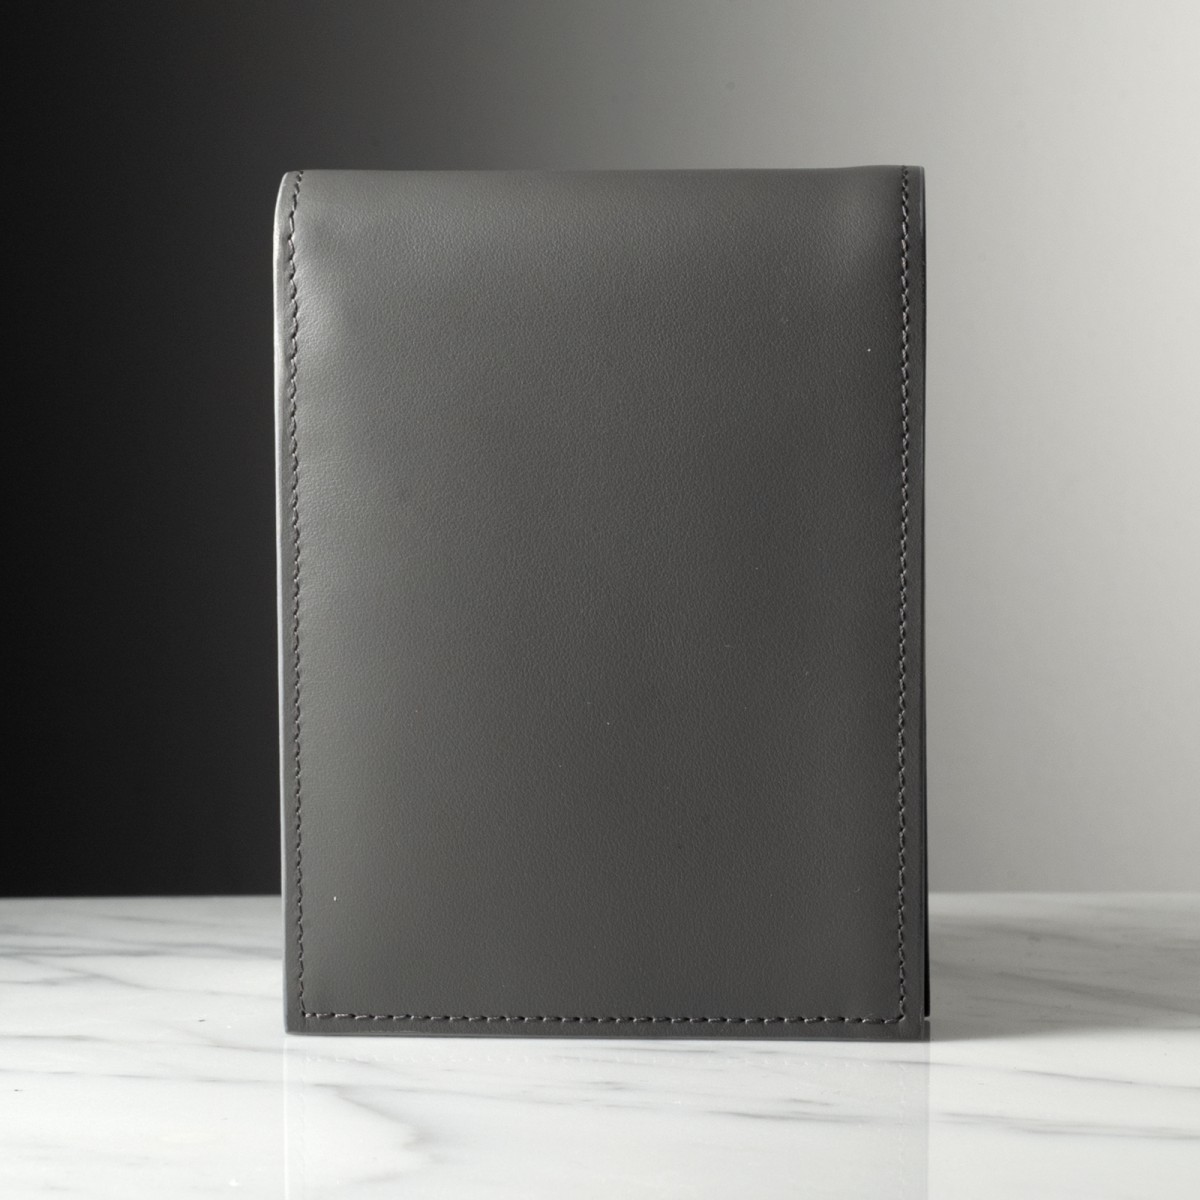 ANDRÉA - Calfskin leather wallet, handmade in Italy